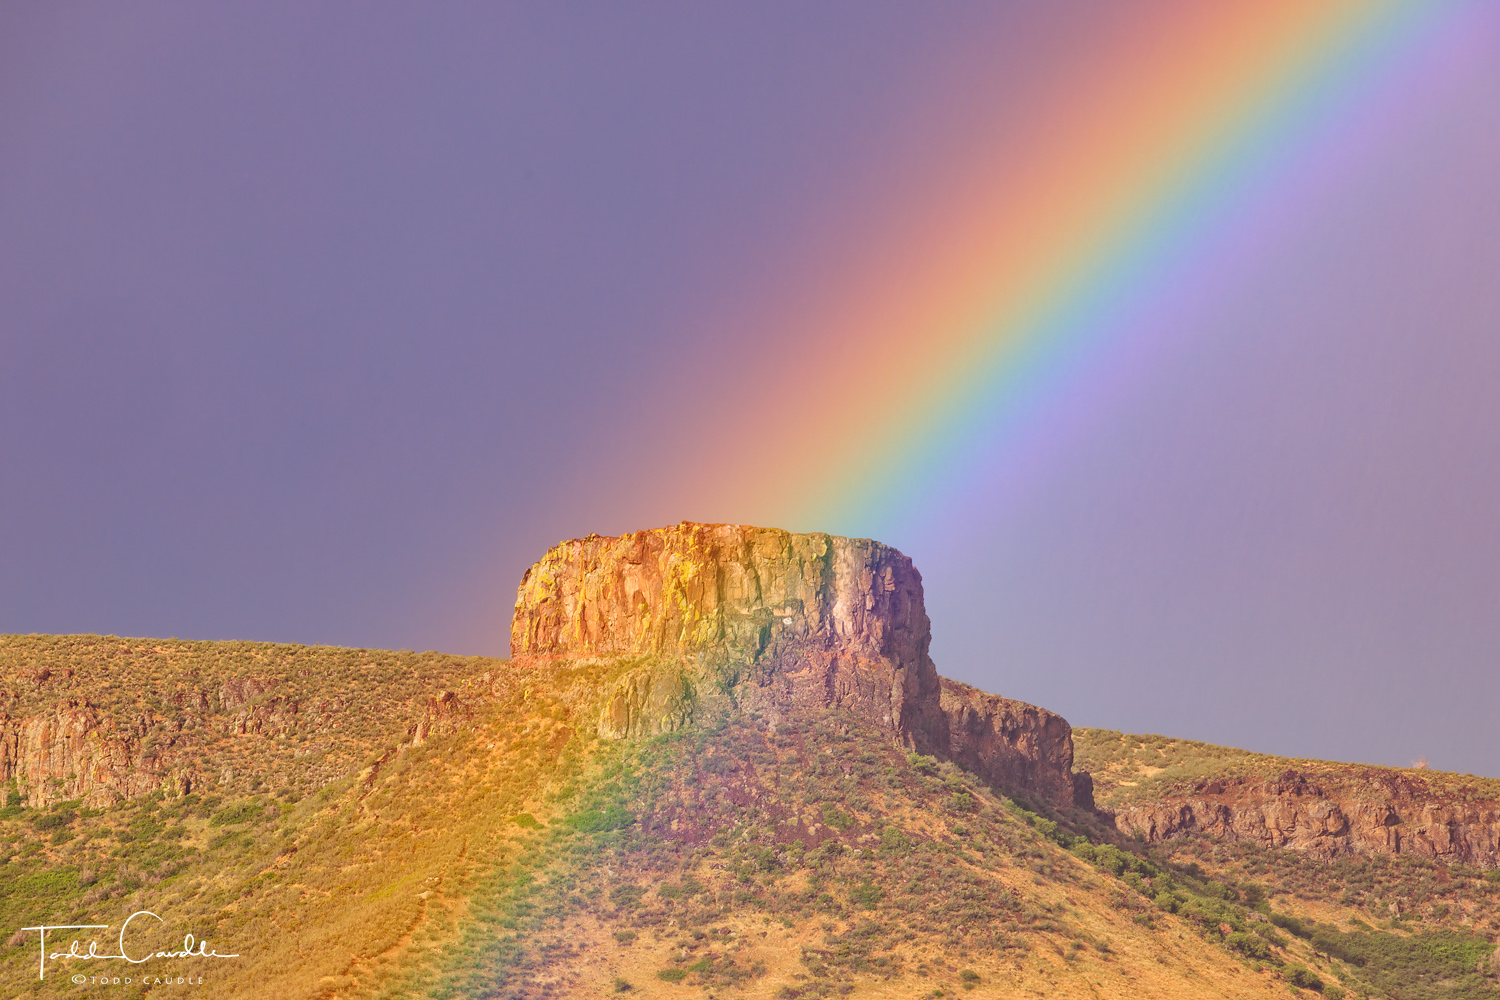 A bright, colorful rainbow slices through the falling rain in front of Castle Rock, the skyline-defining geological feature of...